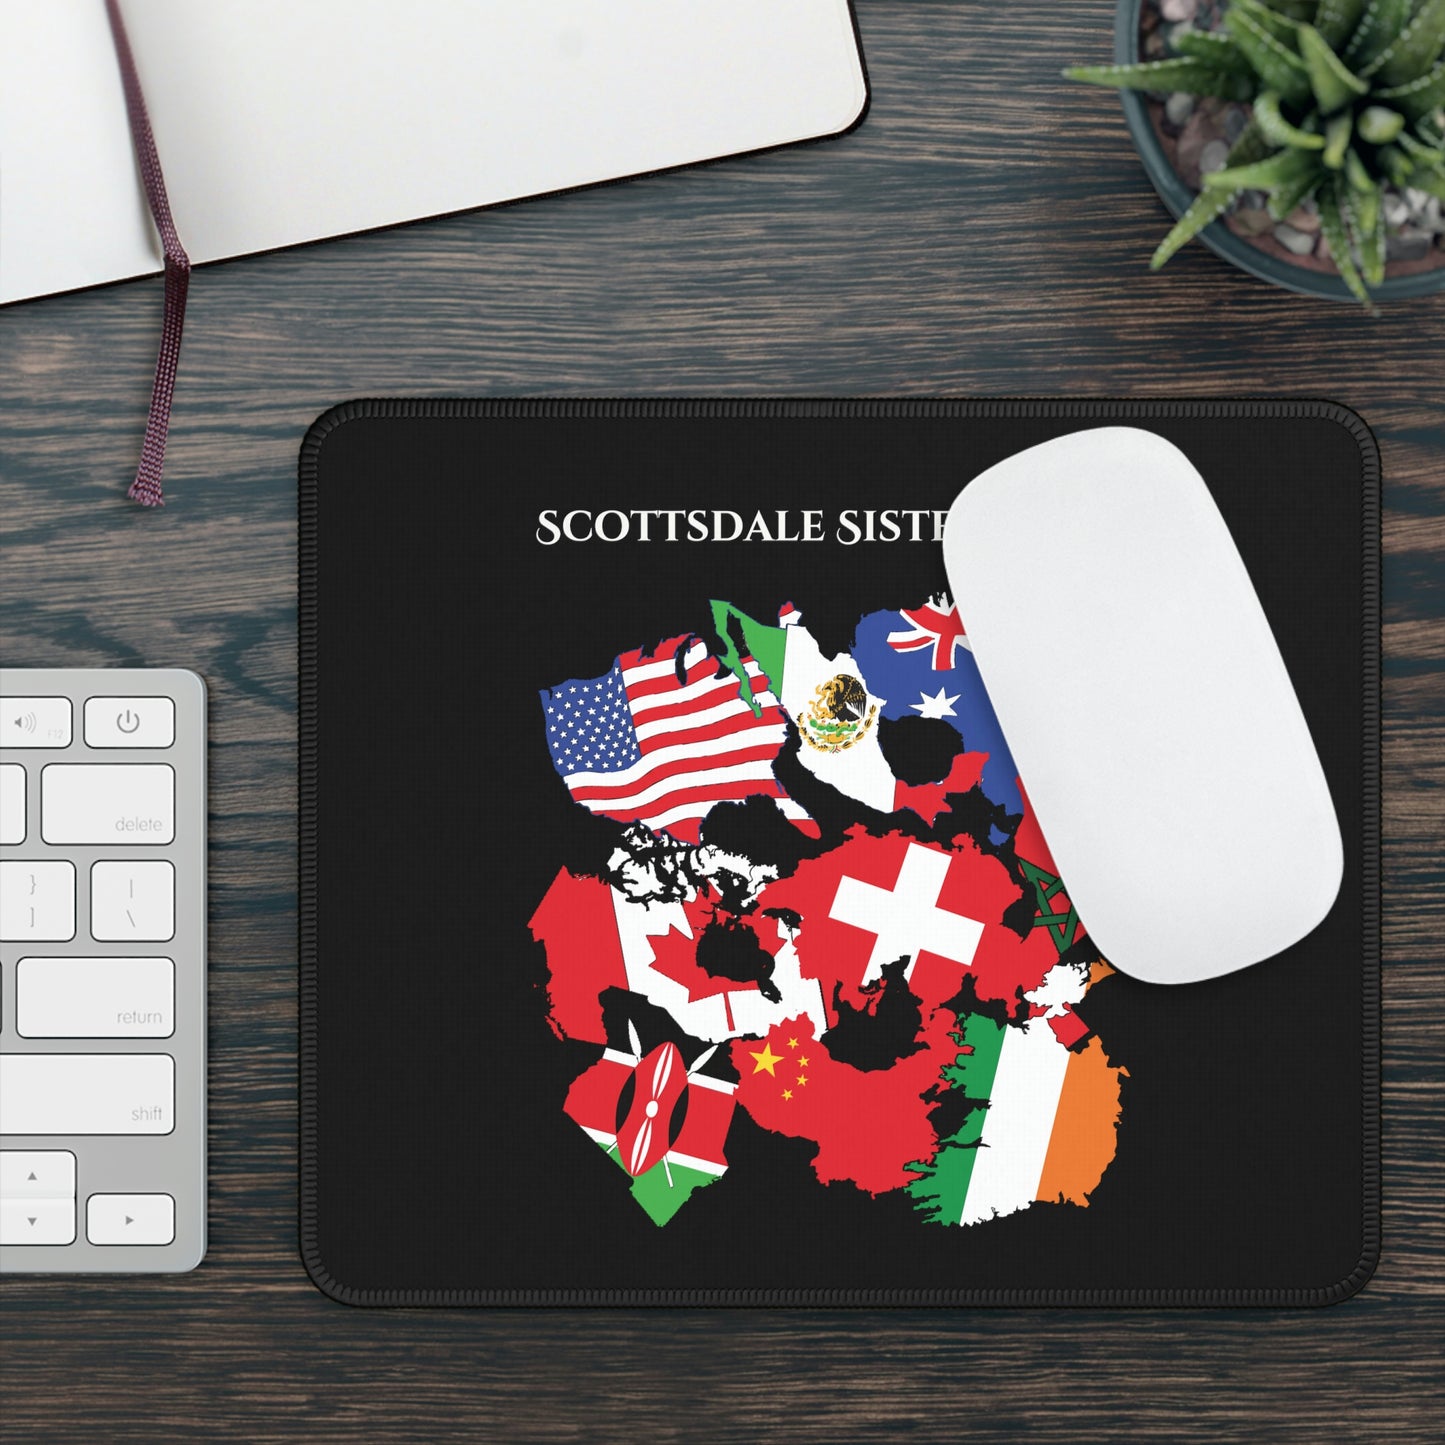 SSCA Mouse Pad